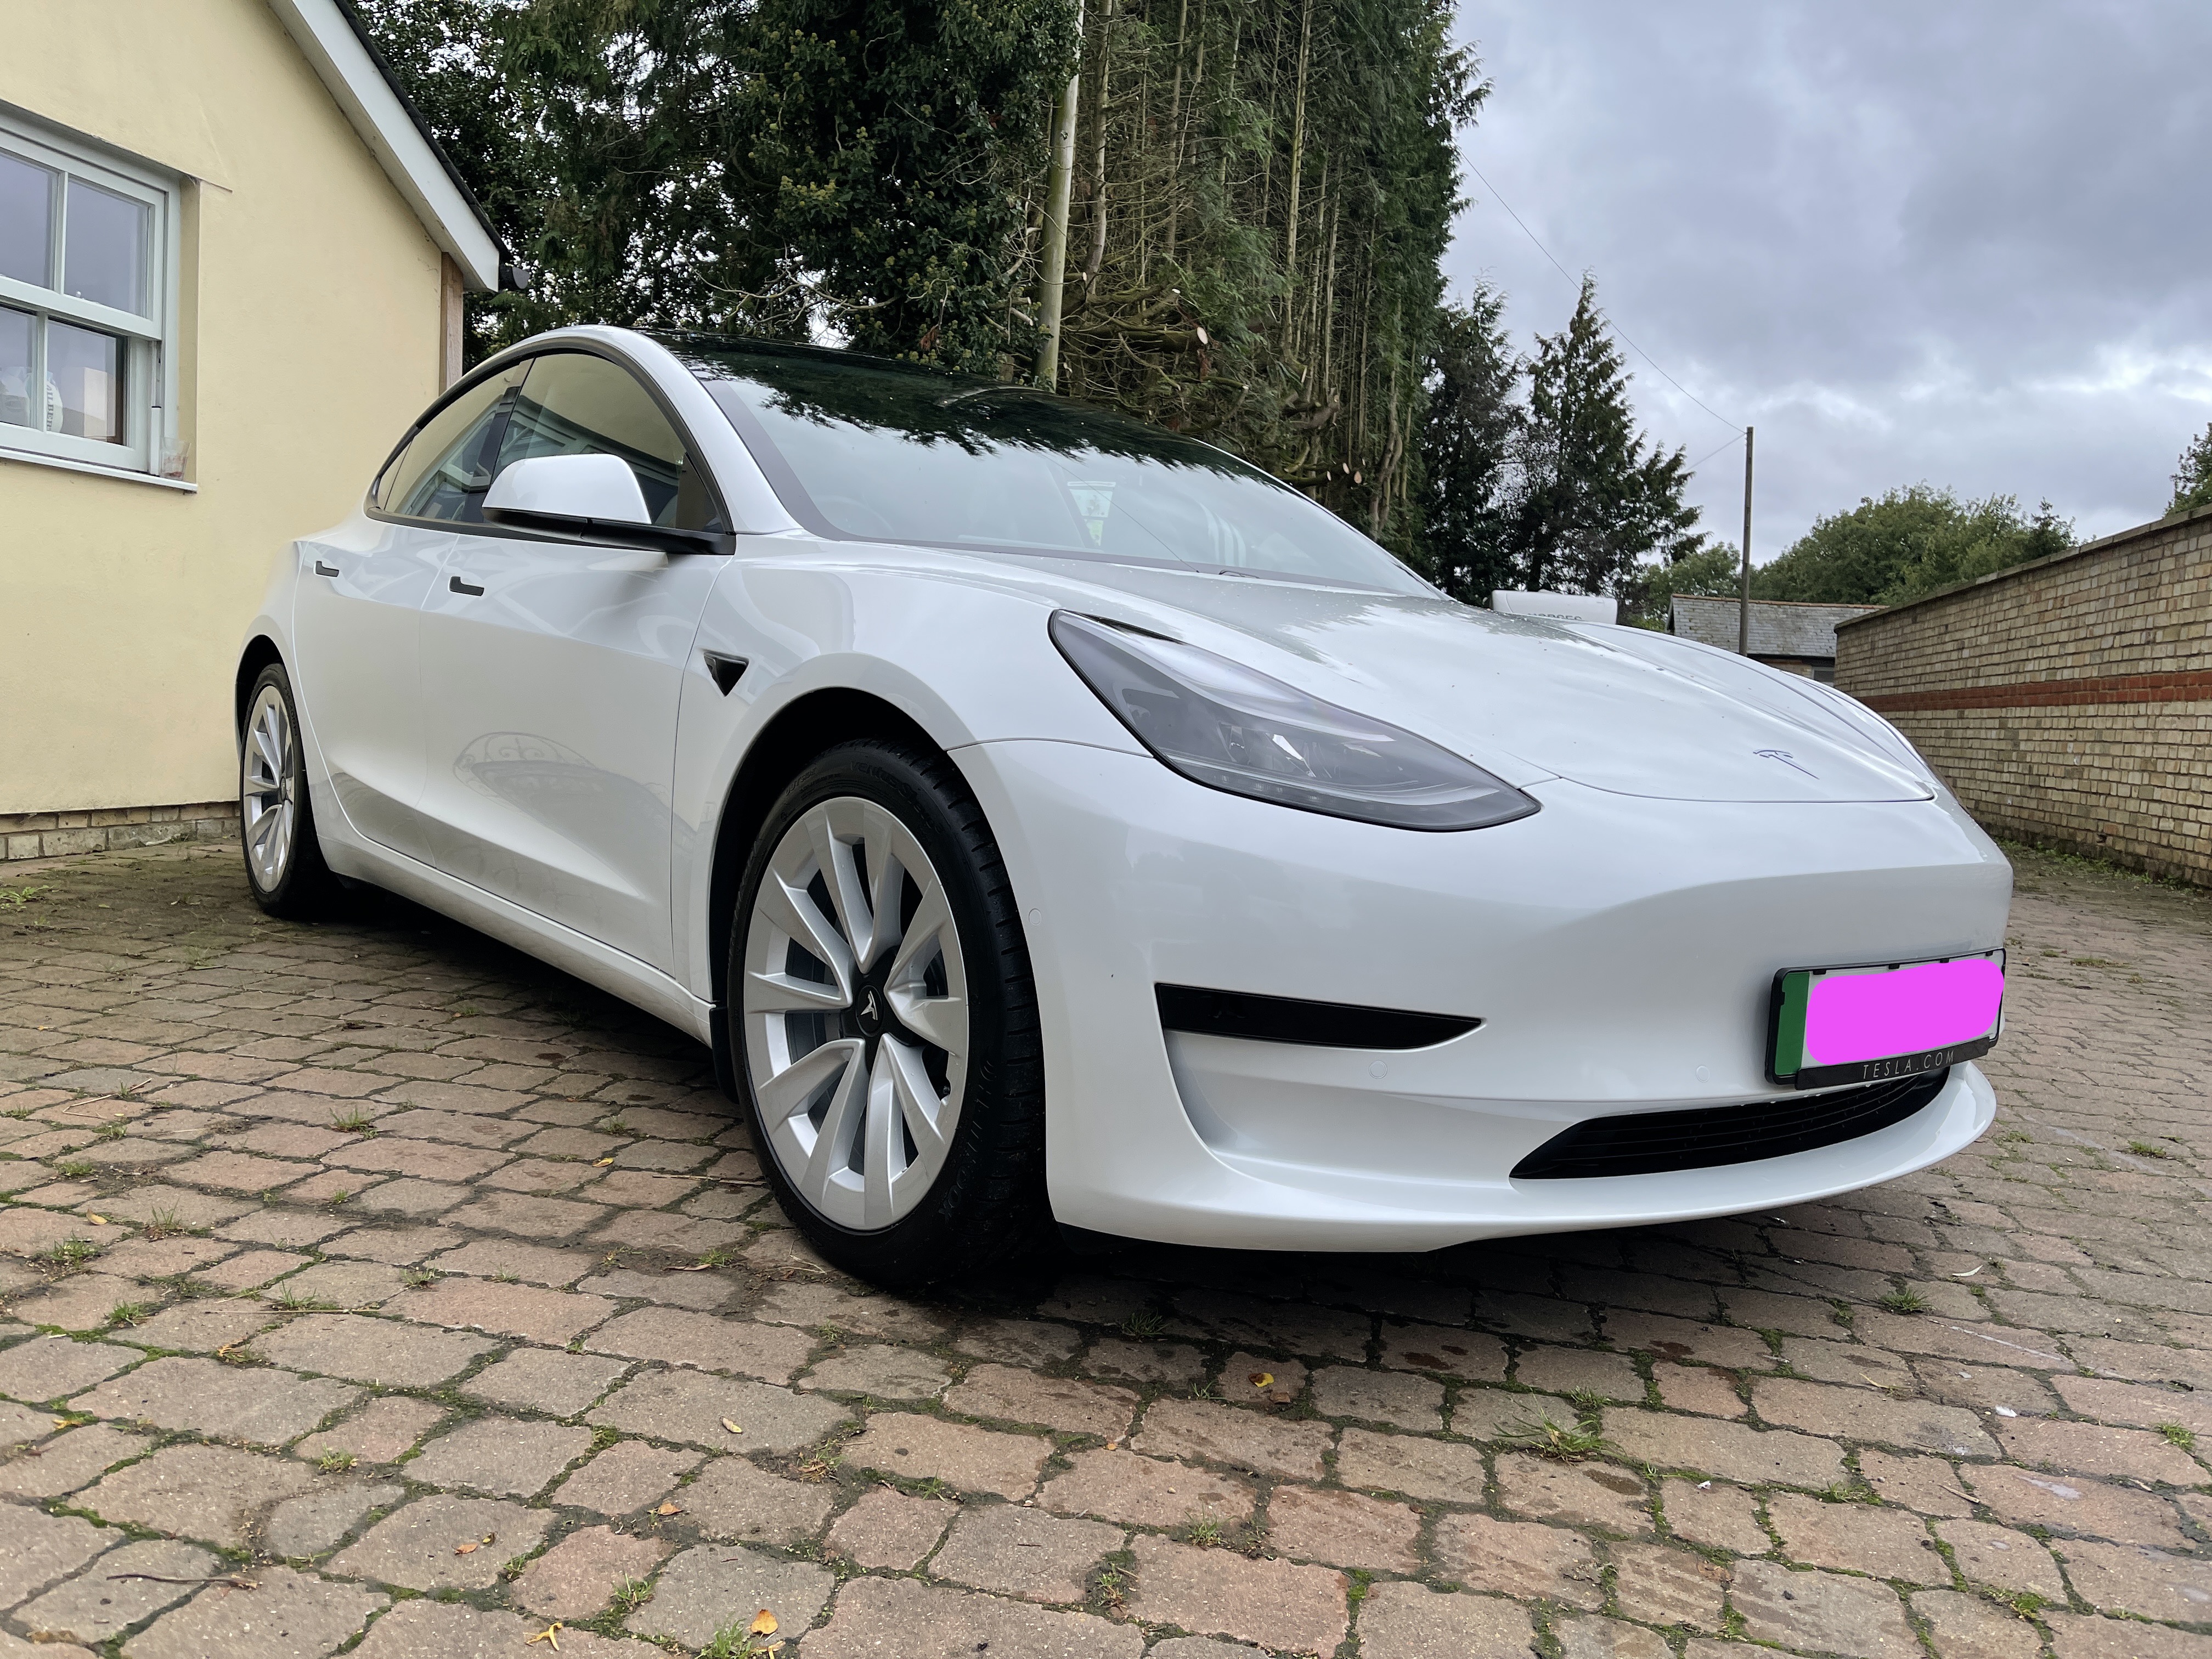 A photo of my new Tesla Model 3 in white with sports wheels